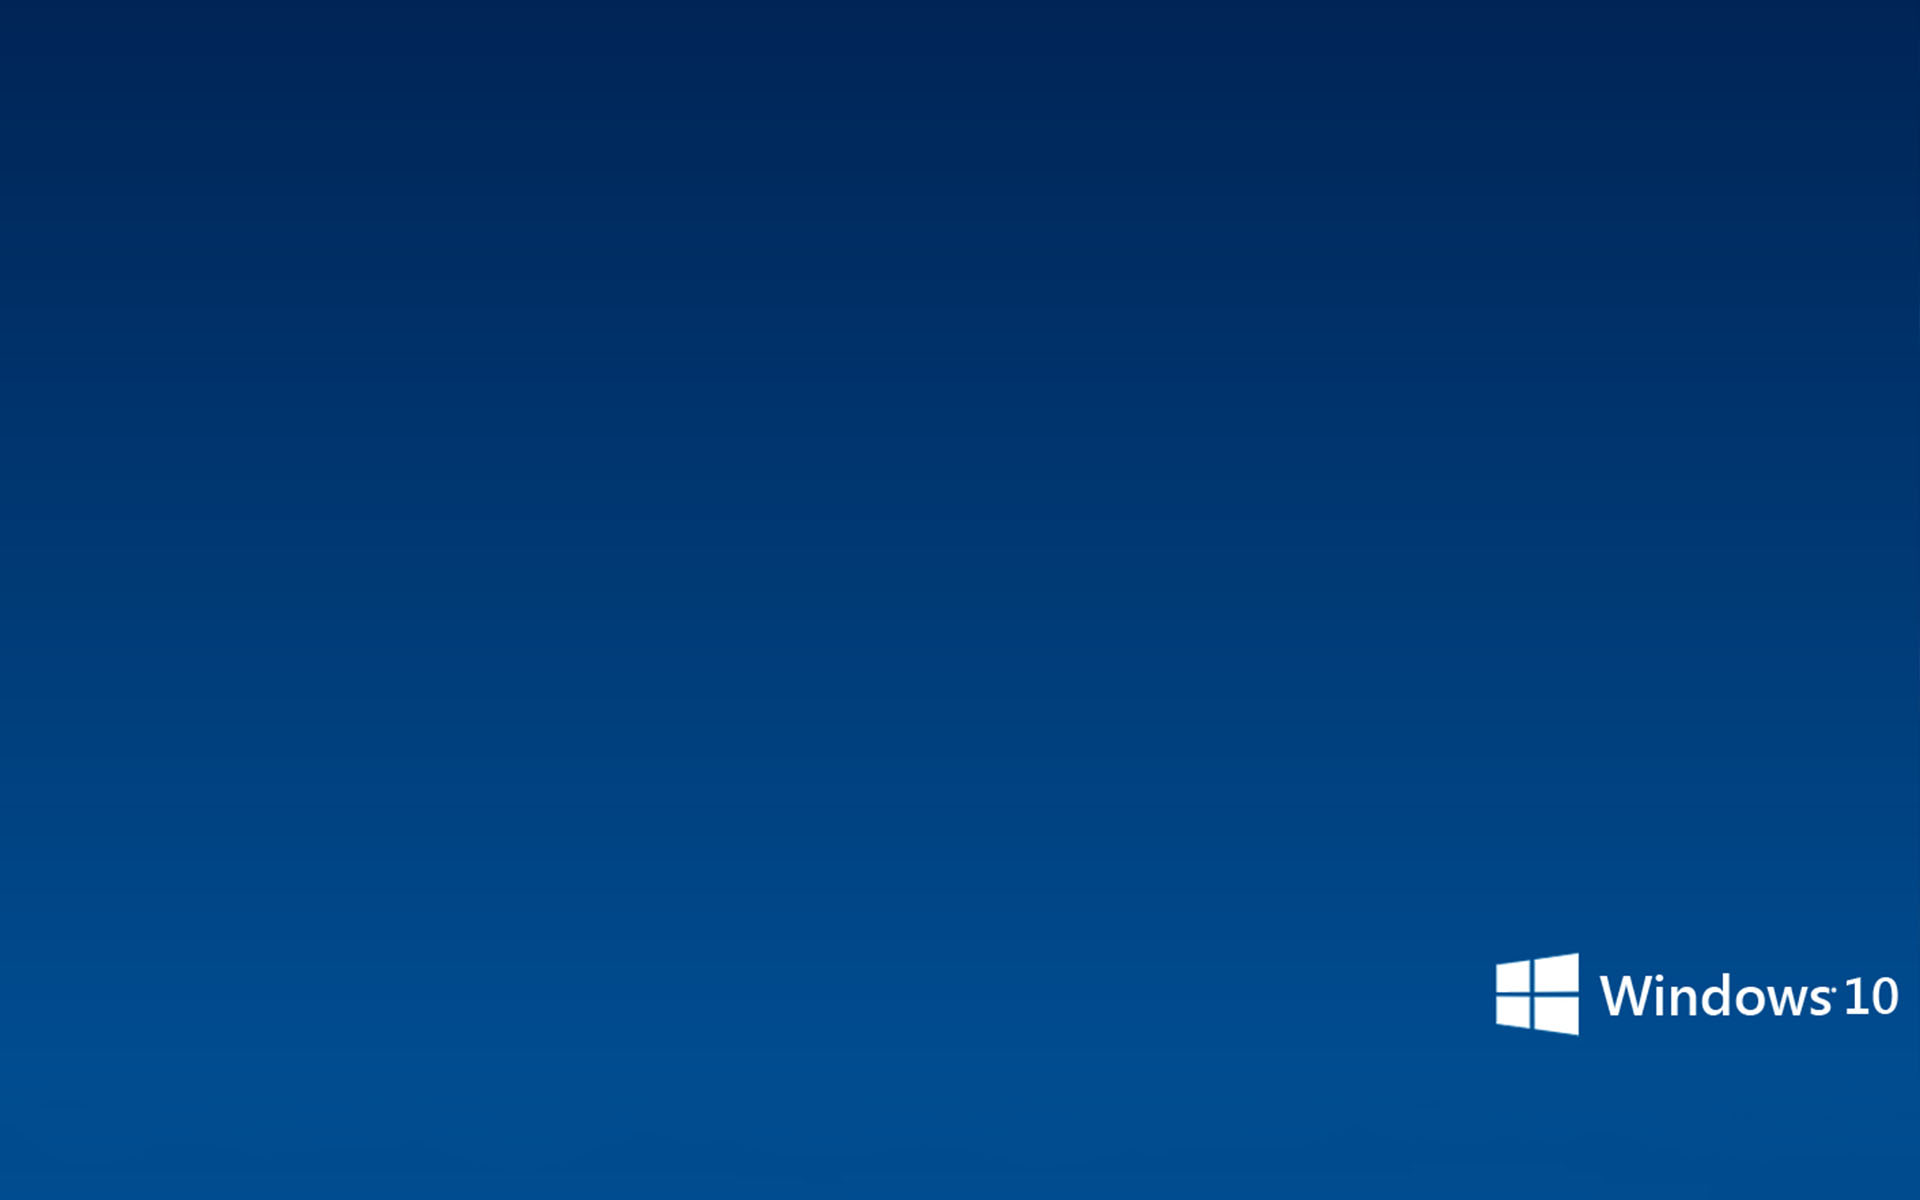 Free Download Simple Microsoft Windows 10 Wallpaper Wallpapers 19x10 For Your Desktop Mobile Tablet Explore 47 Microsoft Wallpapers For Windows 10 Hd Wallpapers For Windows 10 Windows 10 Mobile Wallpapers New Windows 10 Wallpaper